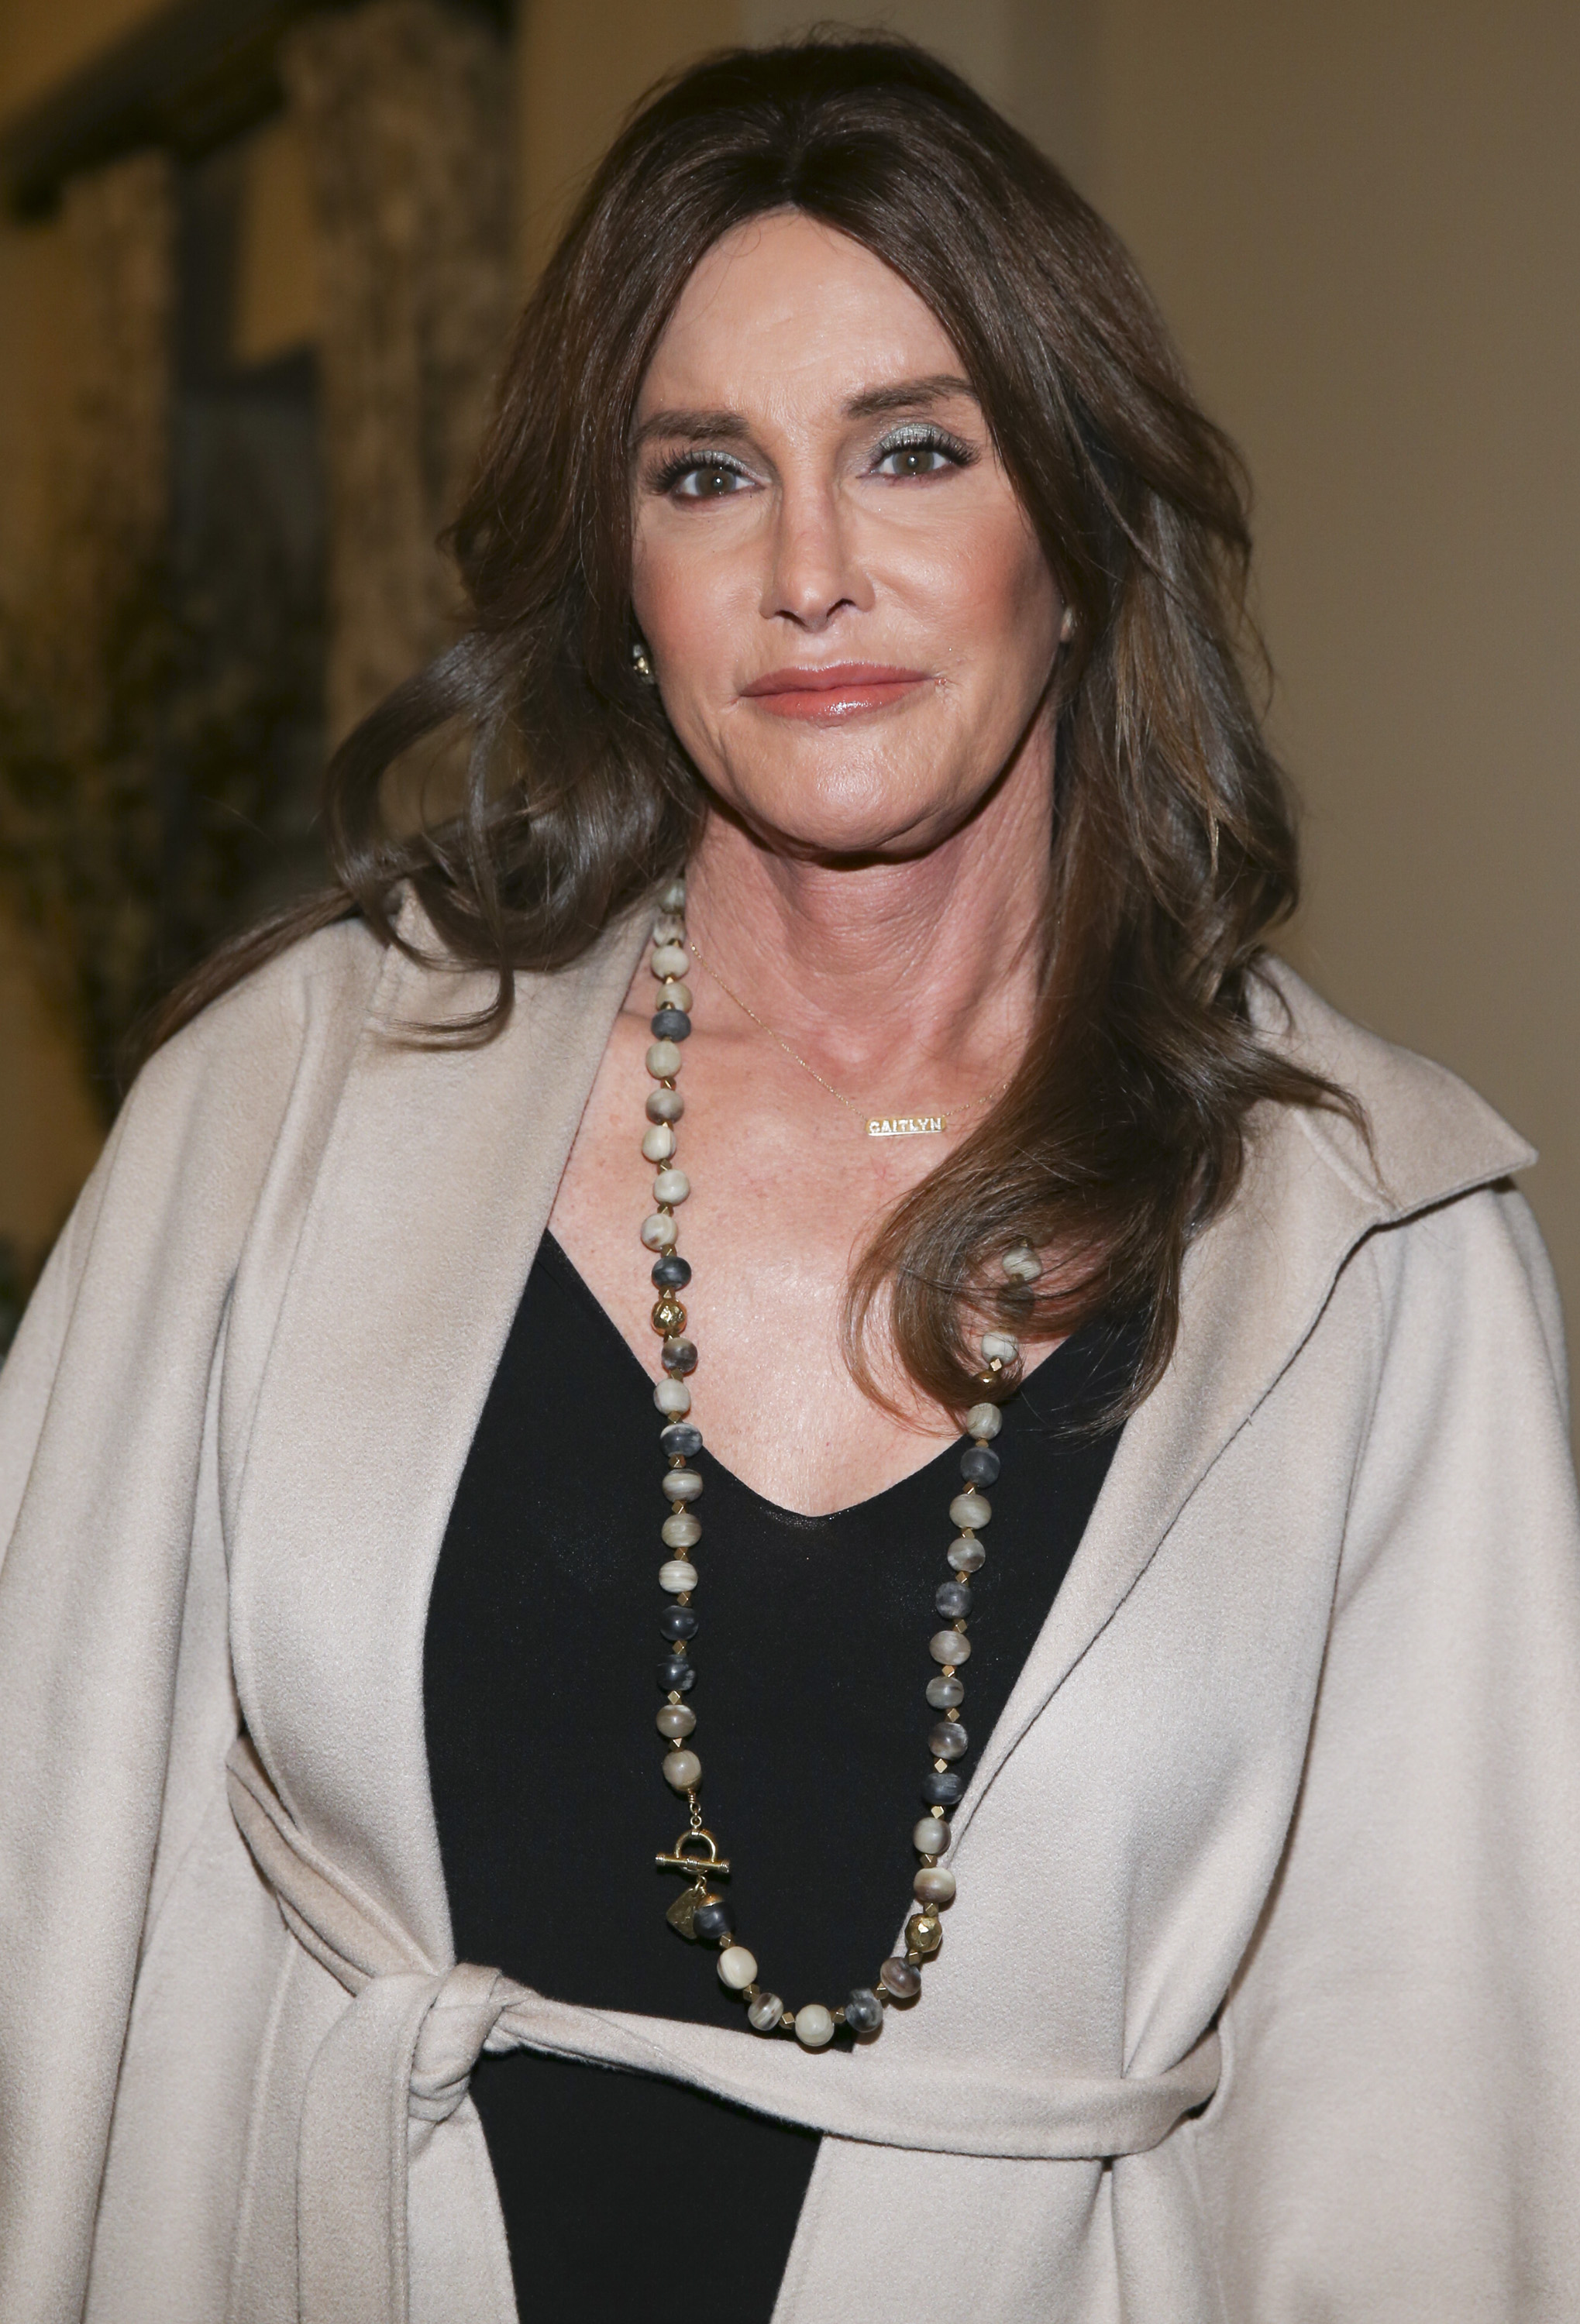 Caitlyn Jenner at the 2016 MAKERS Conference in Rancho Palos Verdes, Calif. on Feb. 1, 2016.